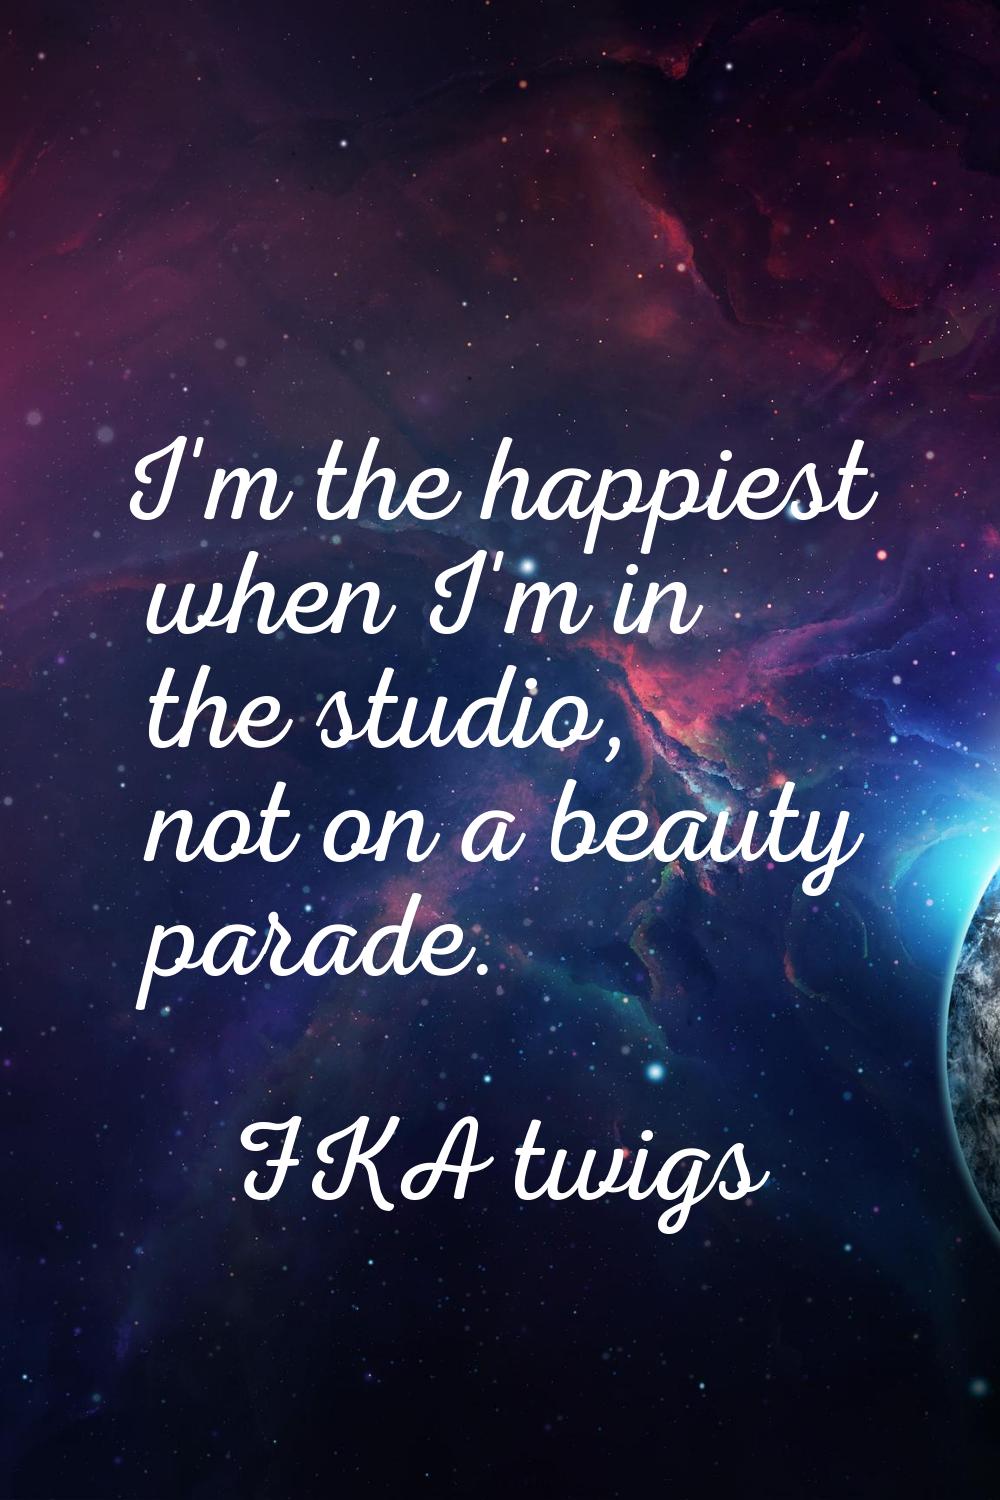 I'm the happiest when I'm in the studio, not on a beauty parade.